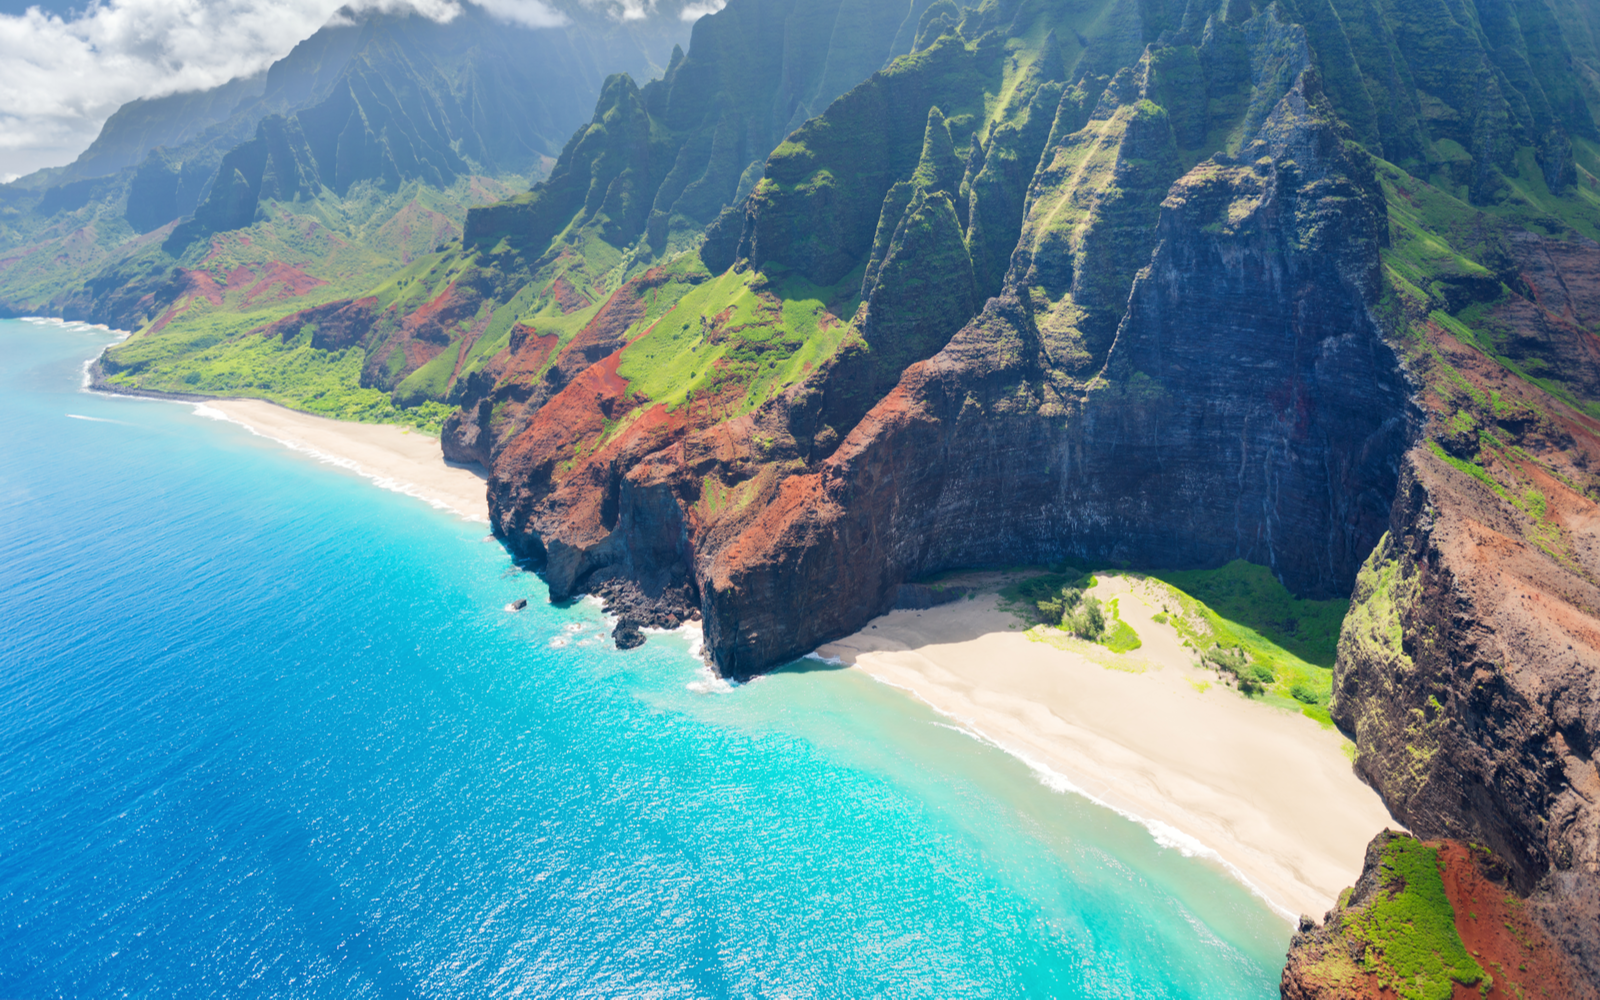 Aerial shot of the Na Pali Coast, home to some of the best beaches in Kauai